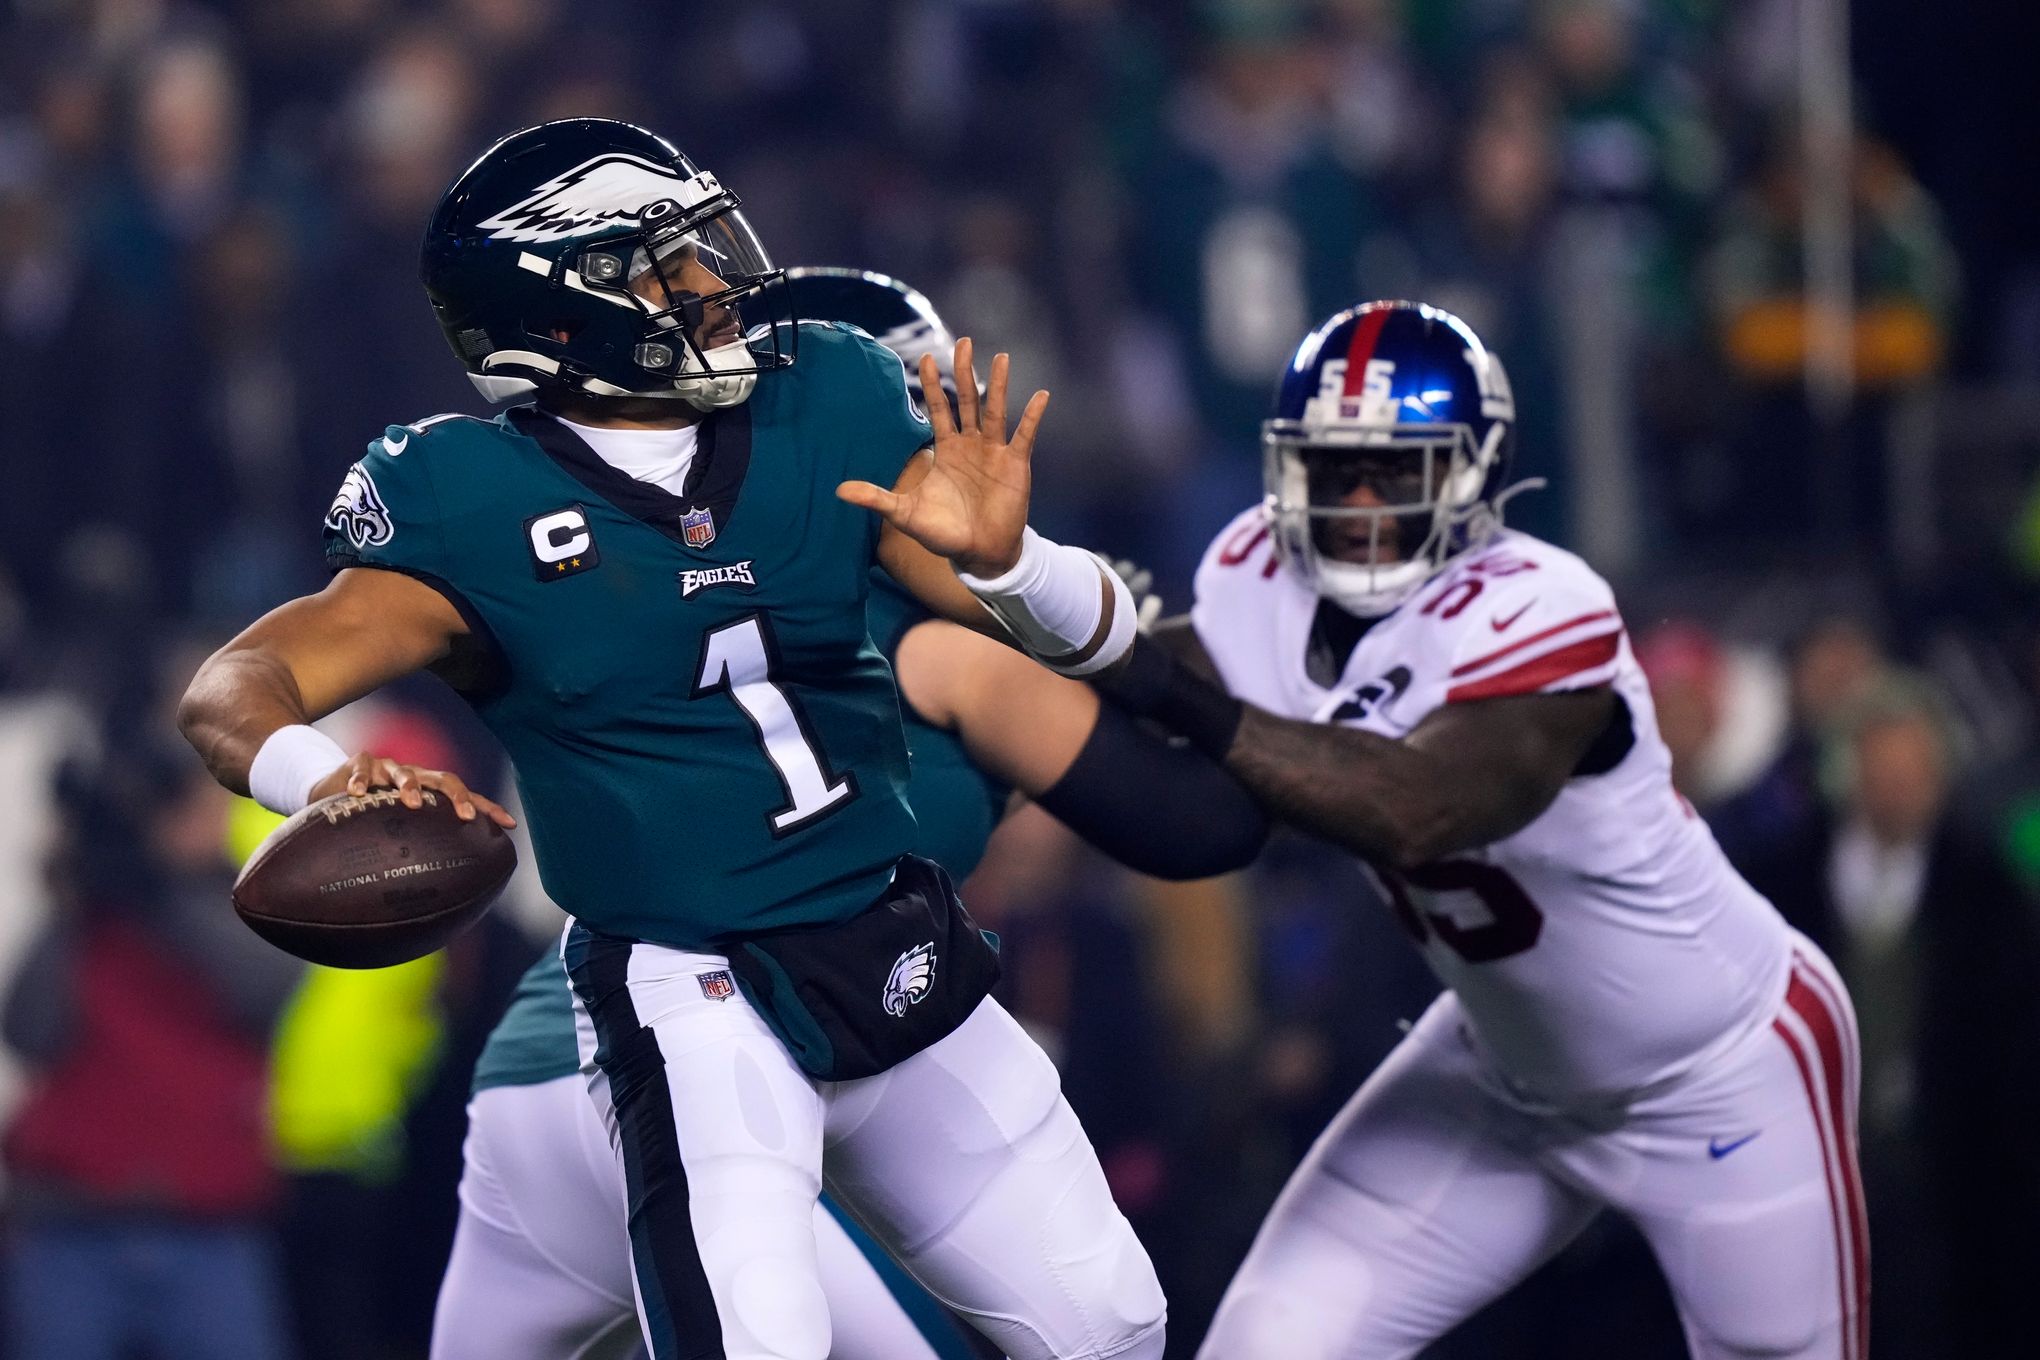 Eagles vs. Giants divisional playoff game open thread - Buffalo